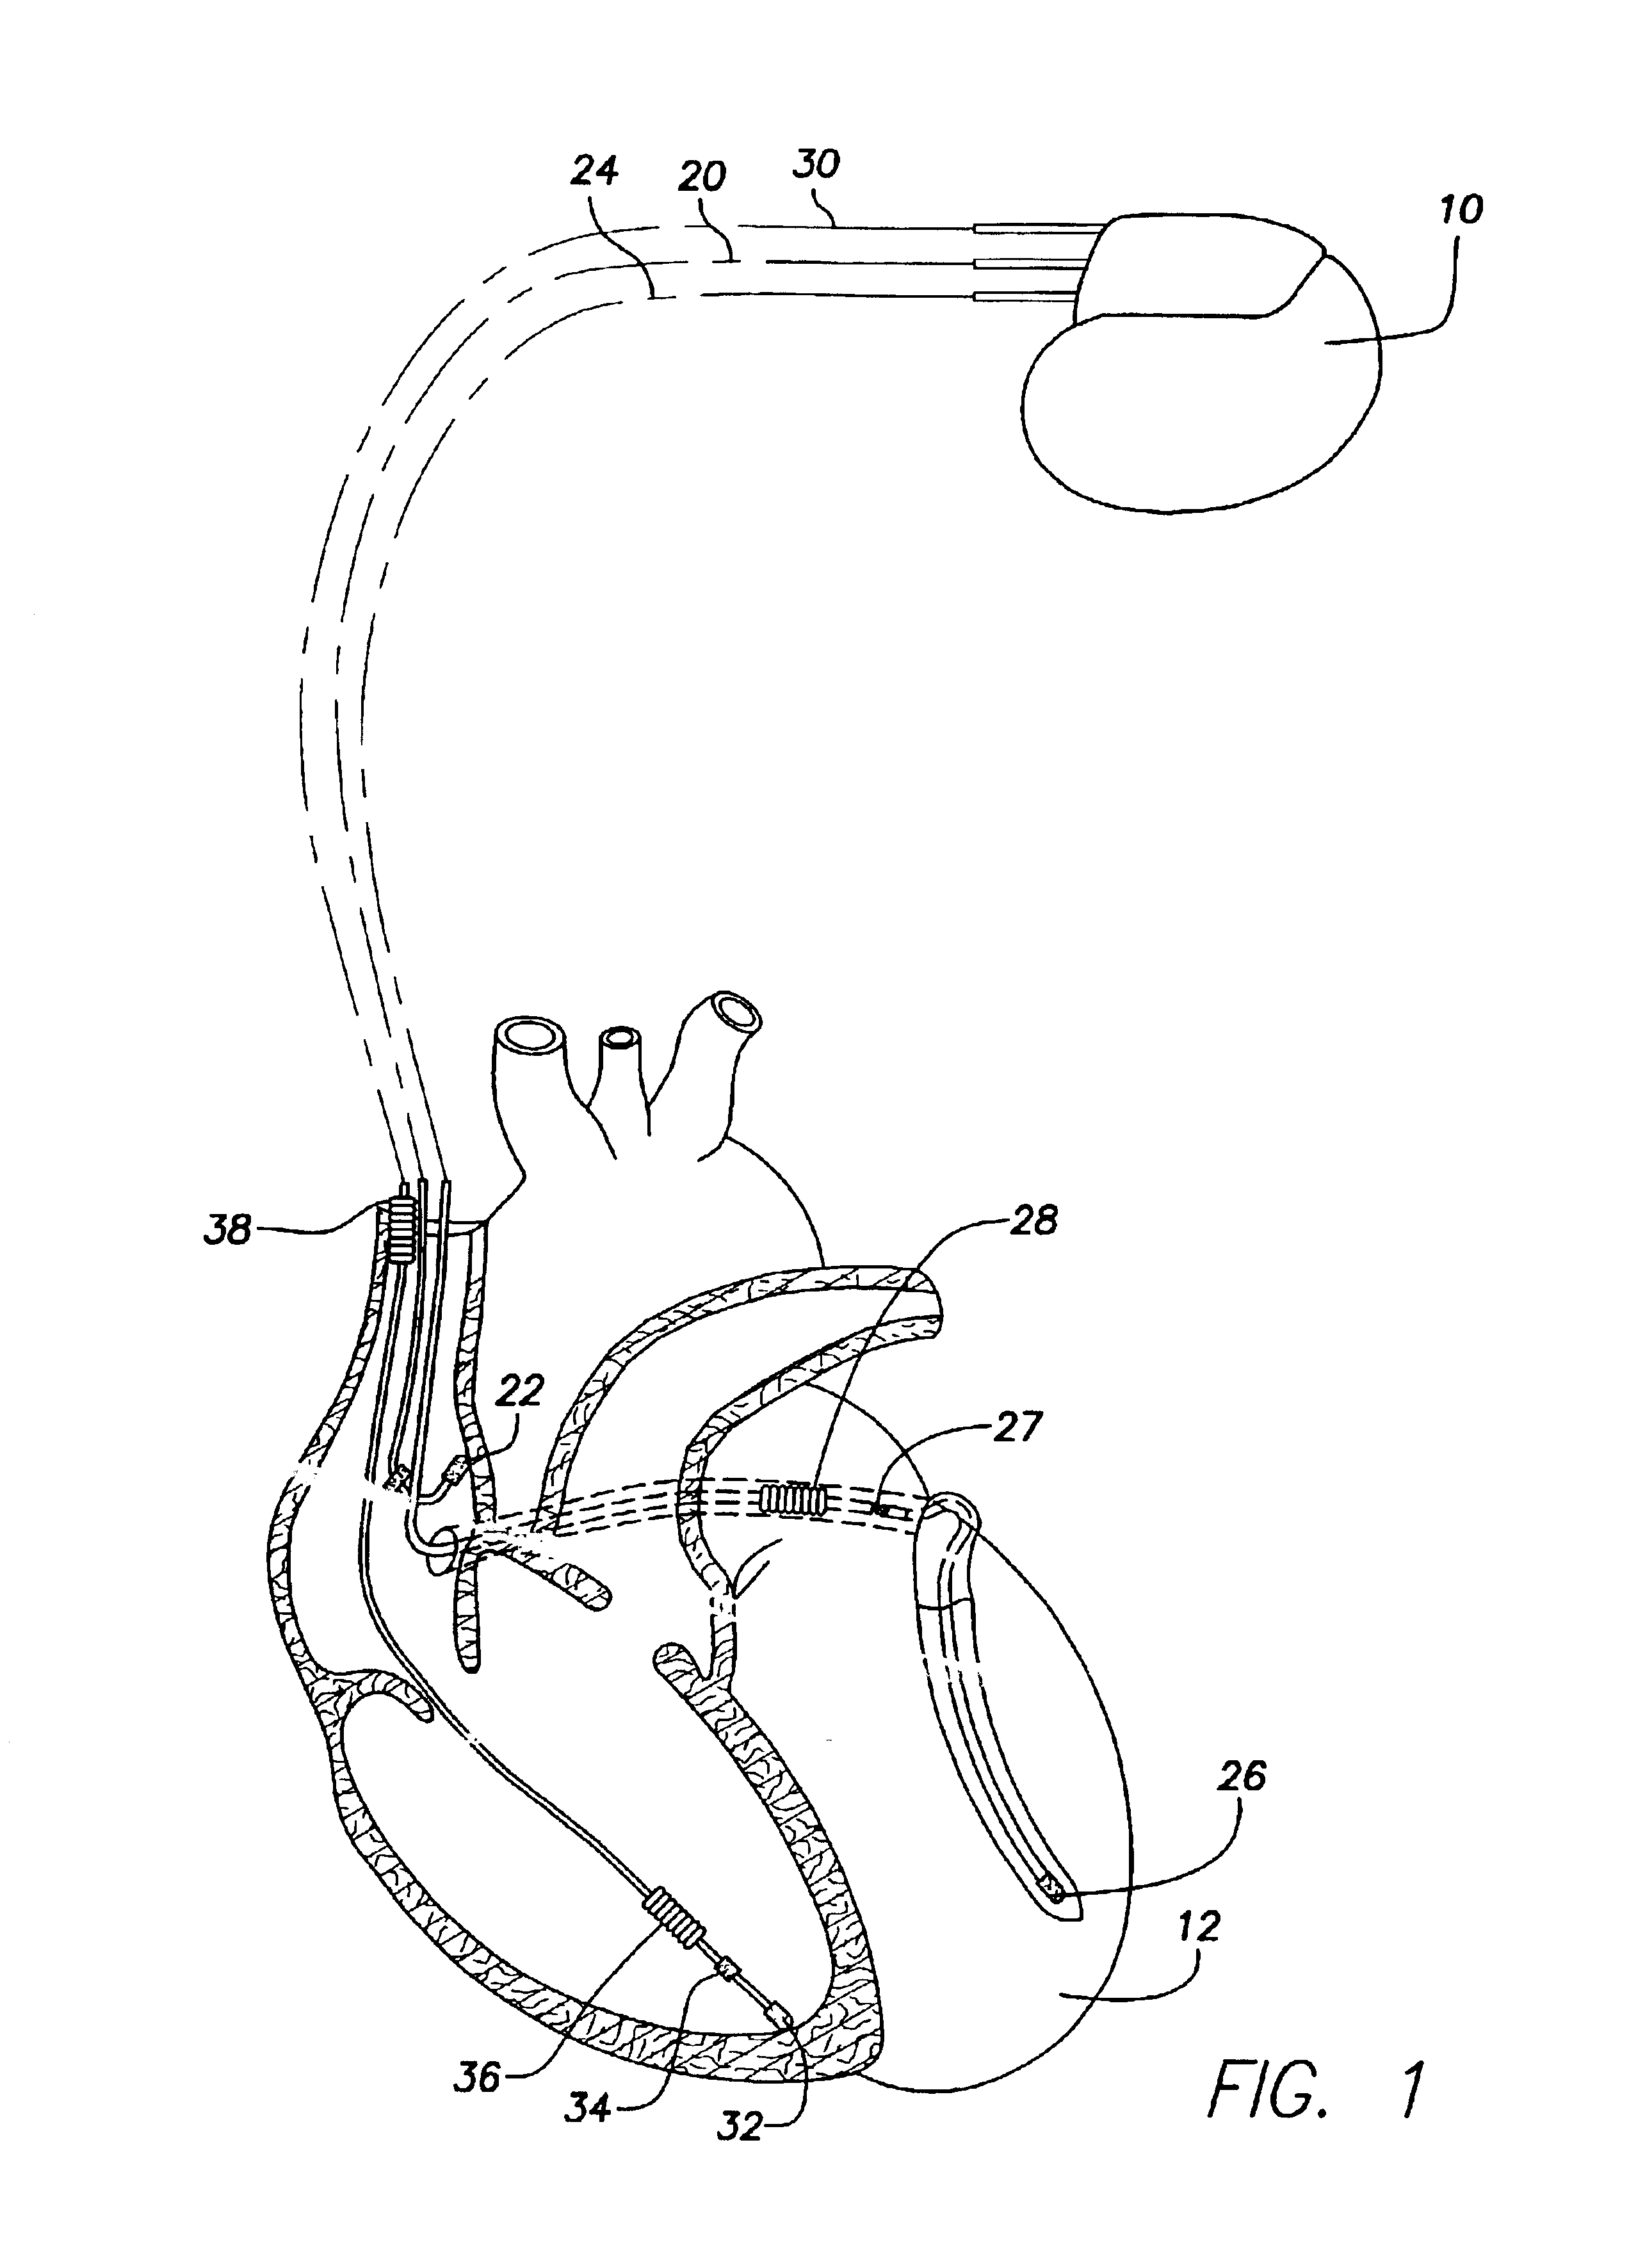 Implantable medical device and method for detecting cardiac events without using of refractory or blanking periods